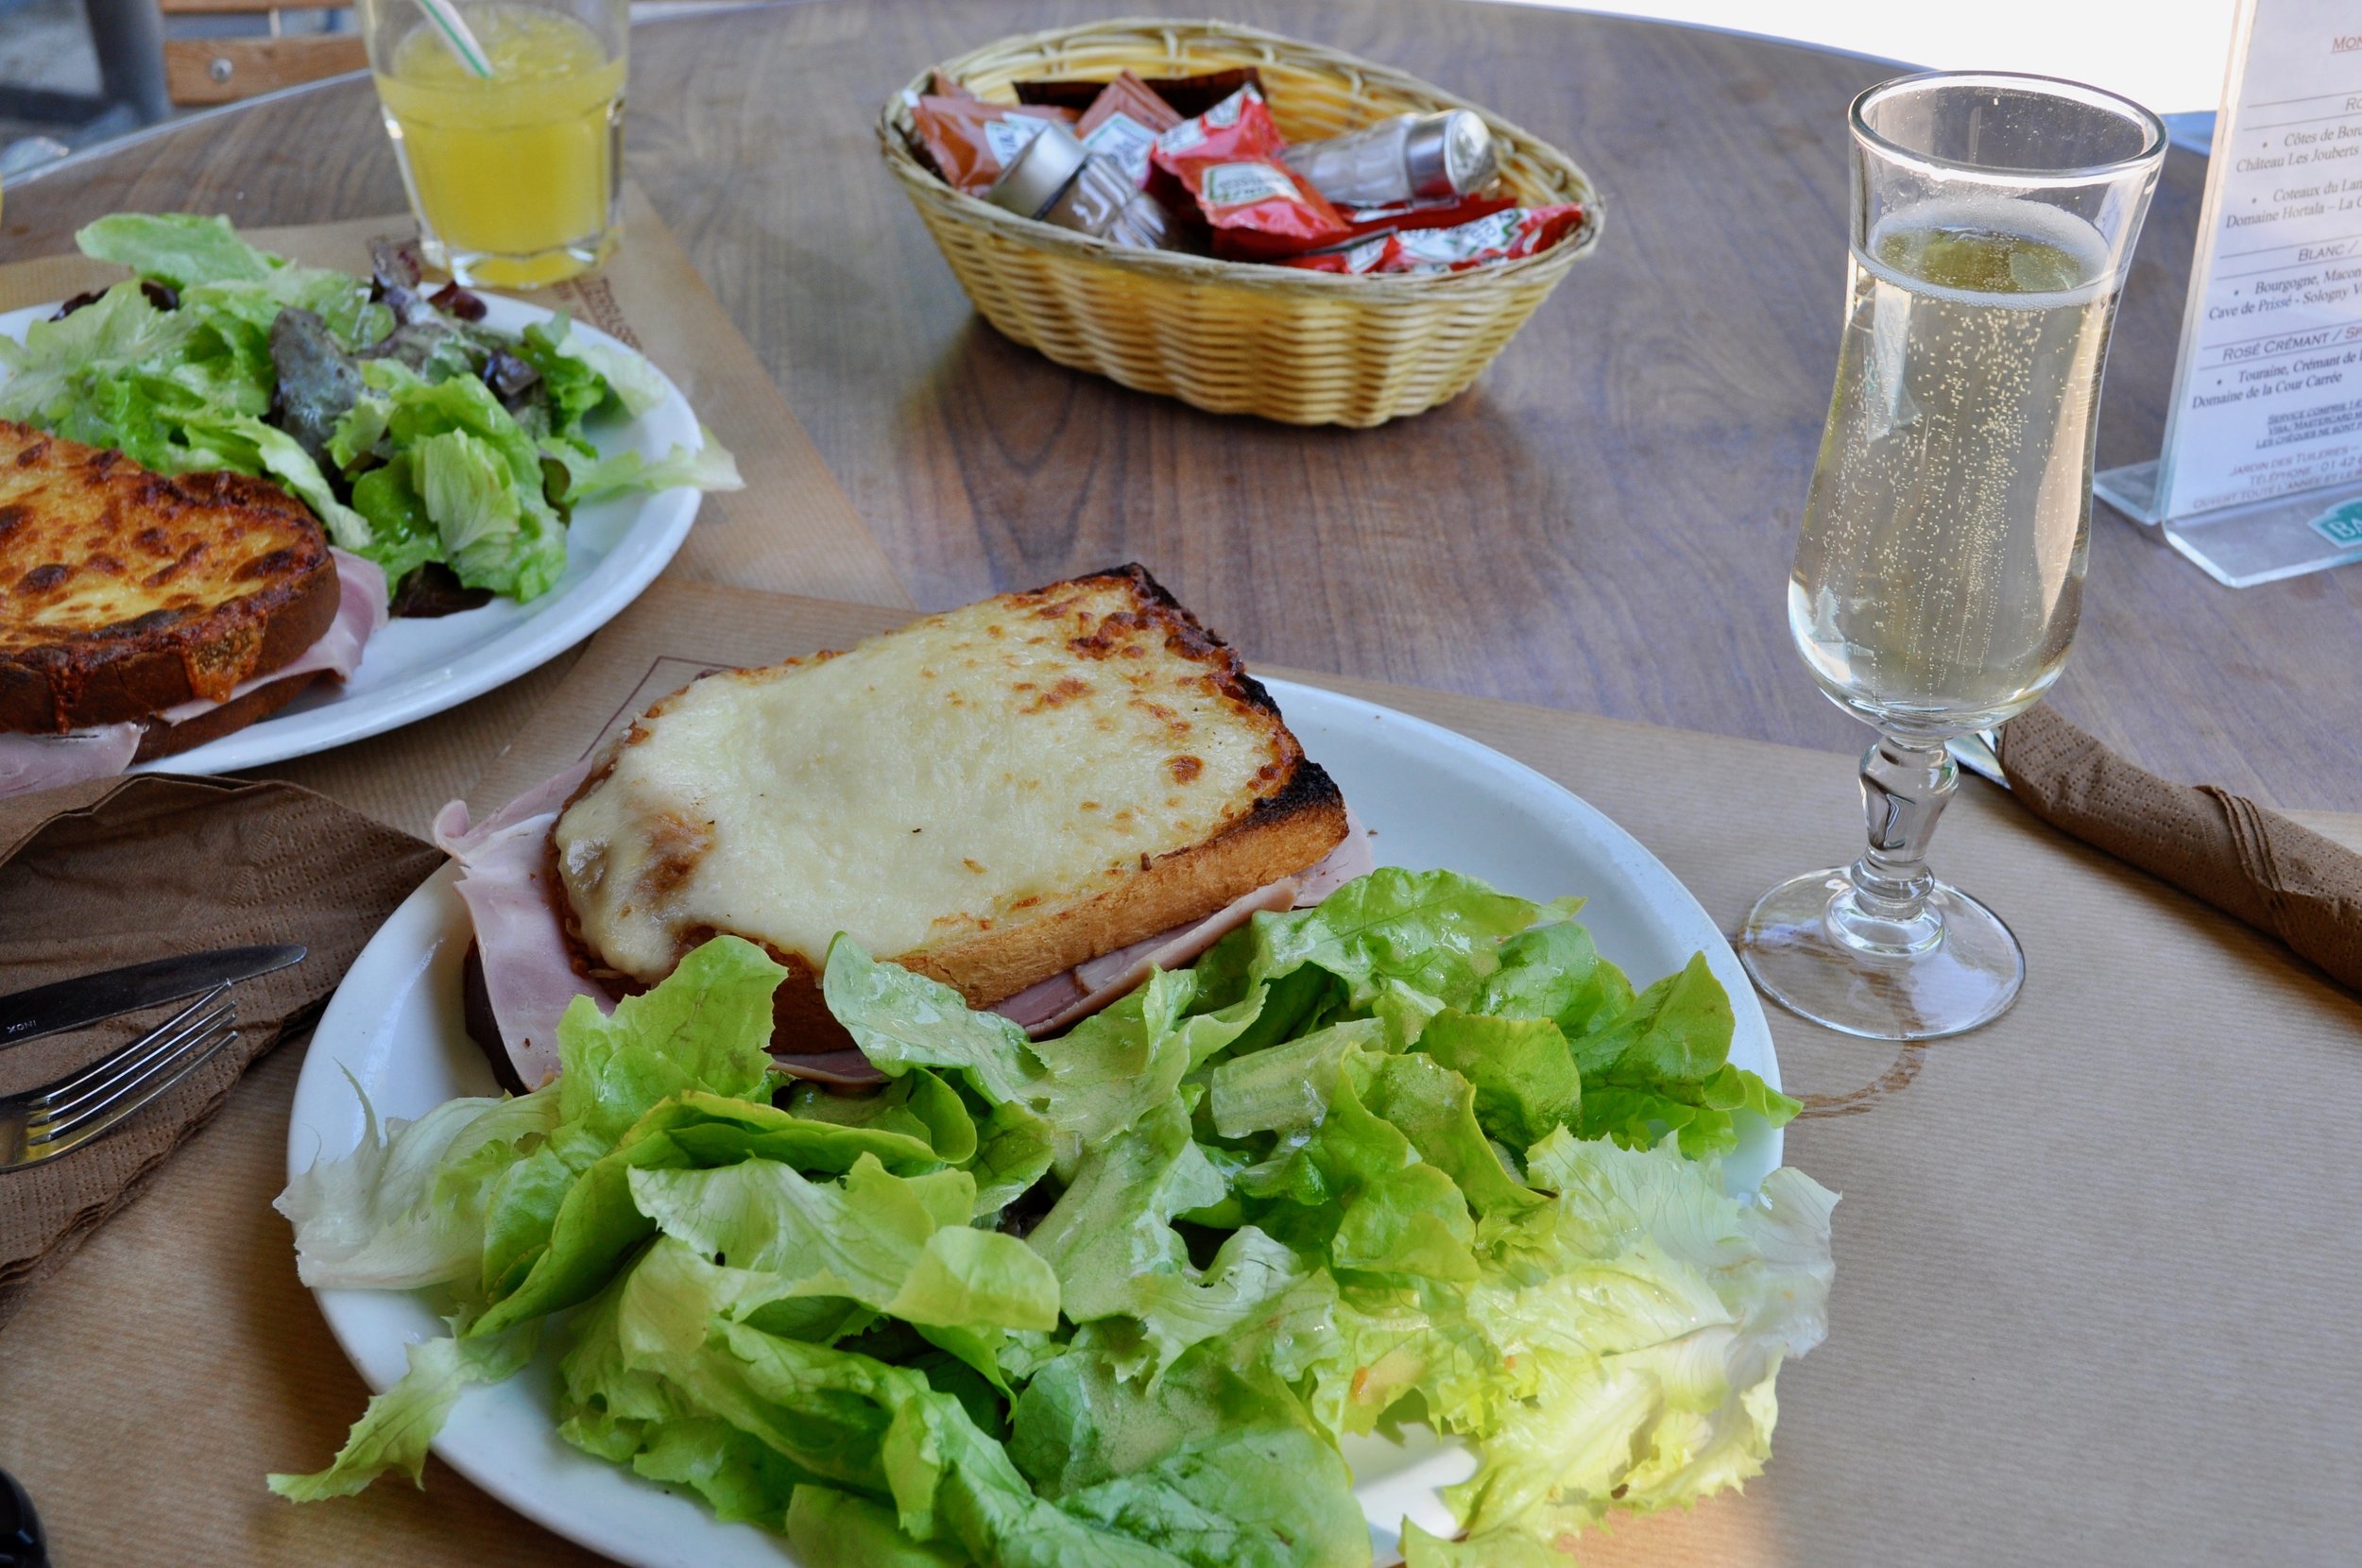 Croque monsieur and Crémant enjoyed in the Tuileries Gardens, outside the Louvre